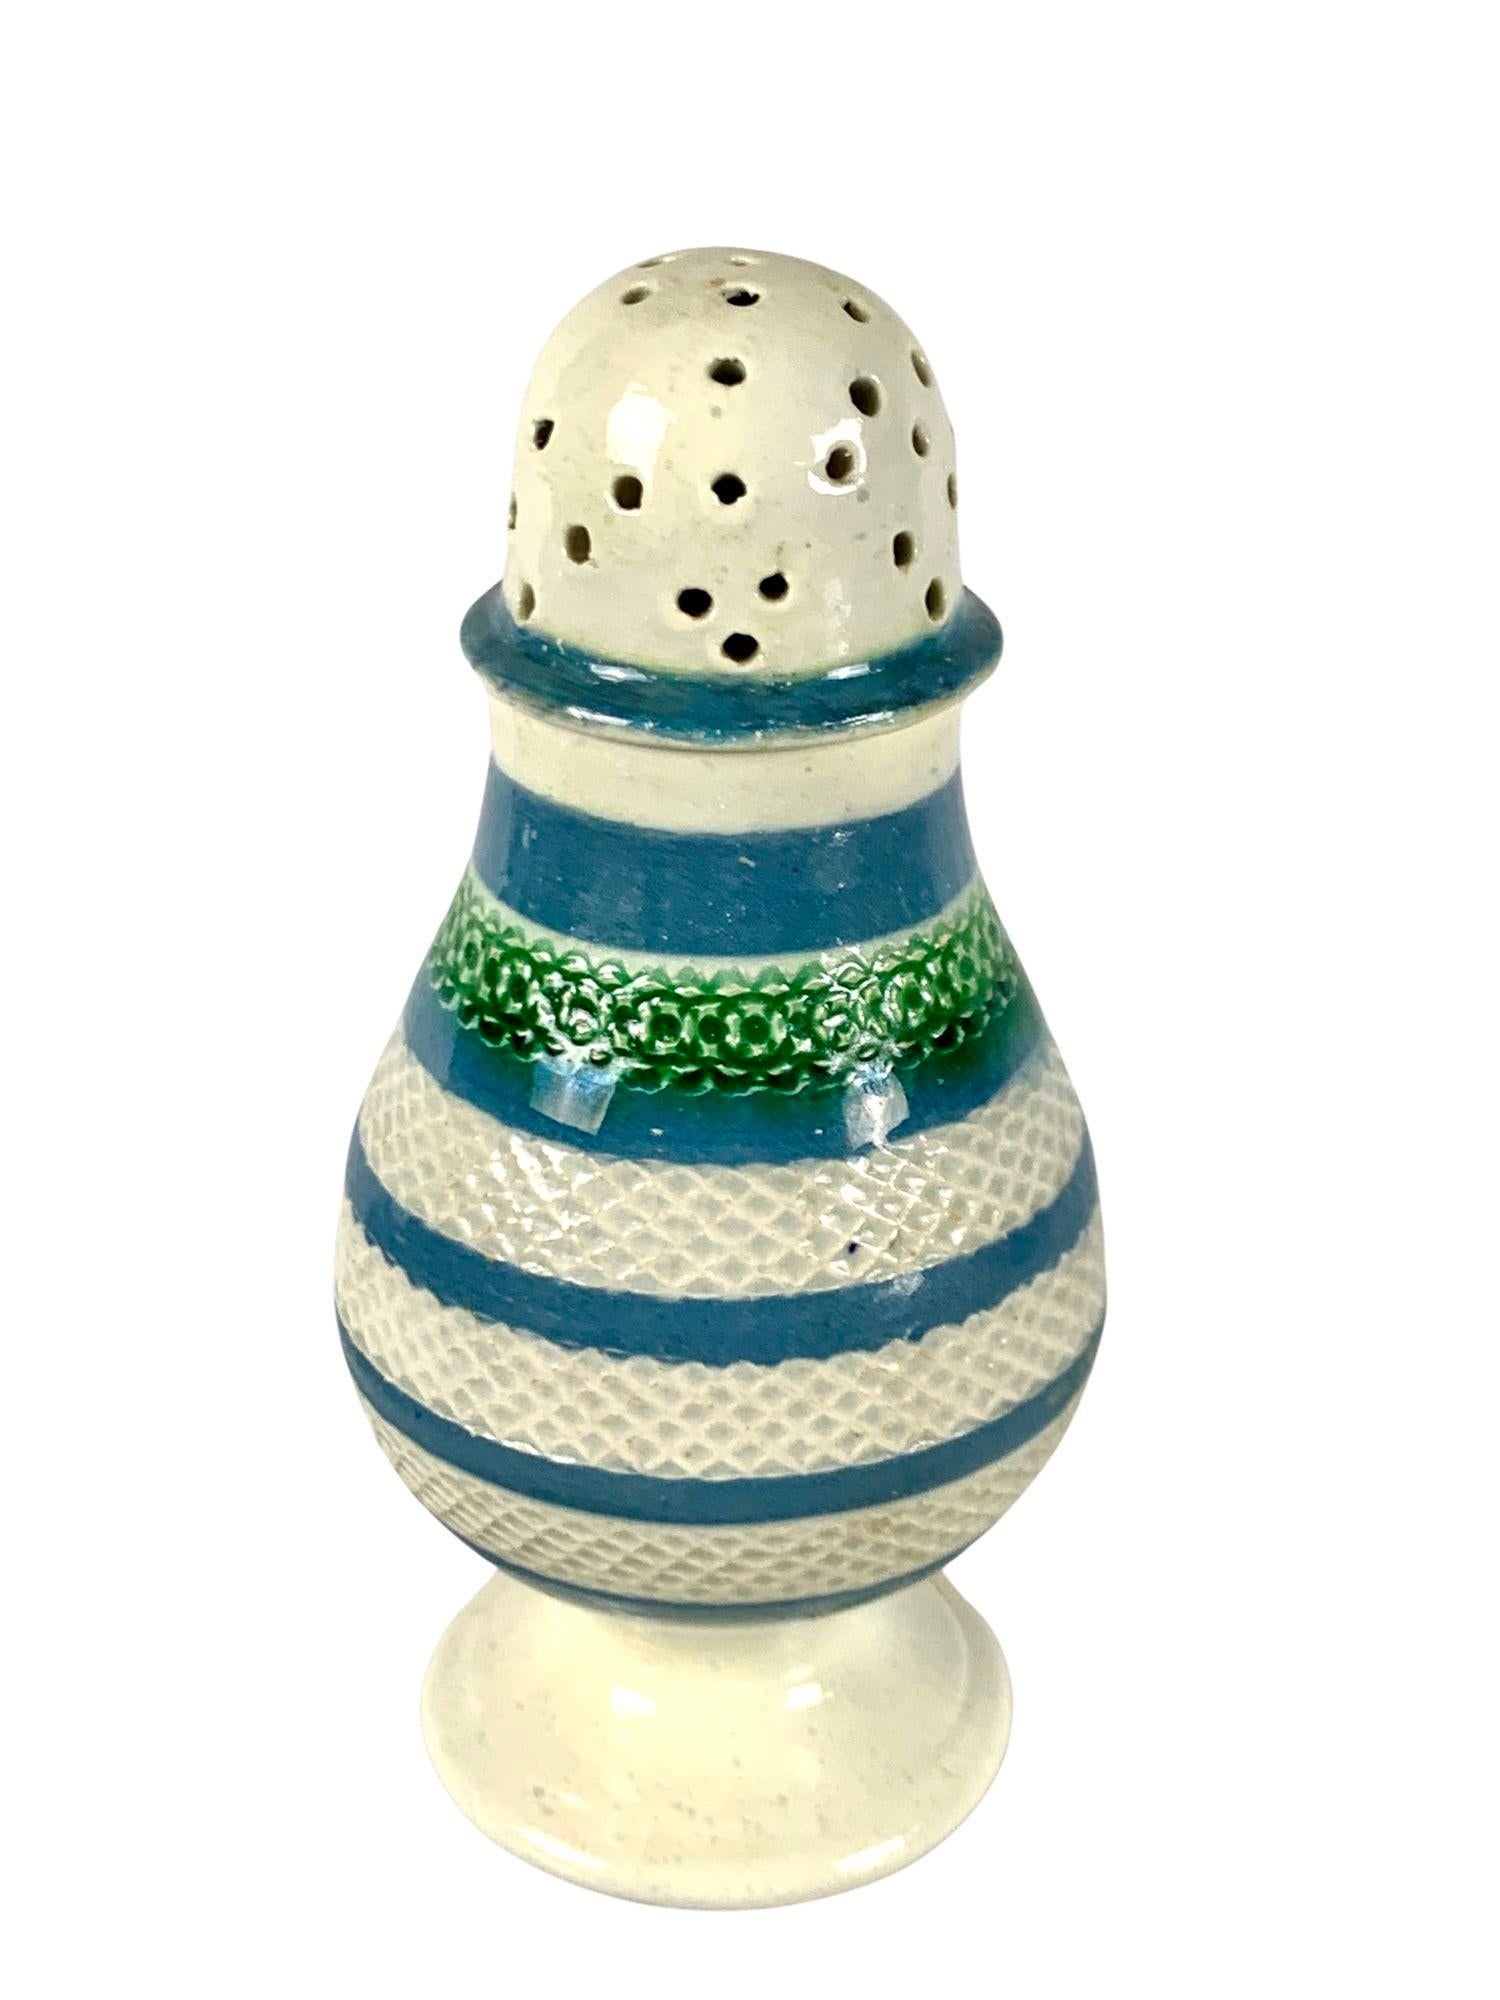 This mochaware saltshaker has an attractive design with four bands of intricate 